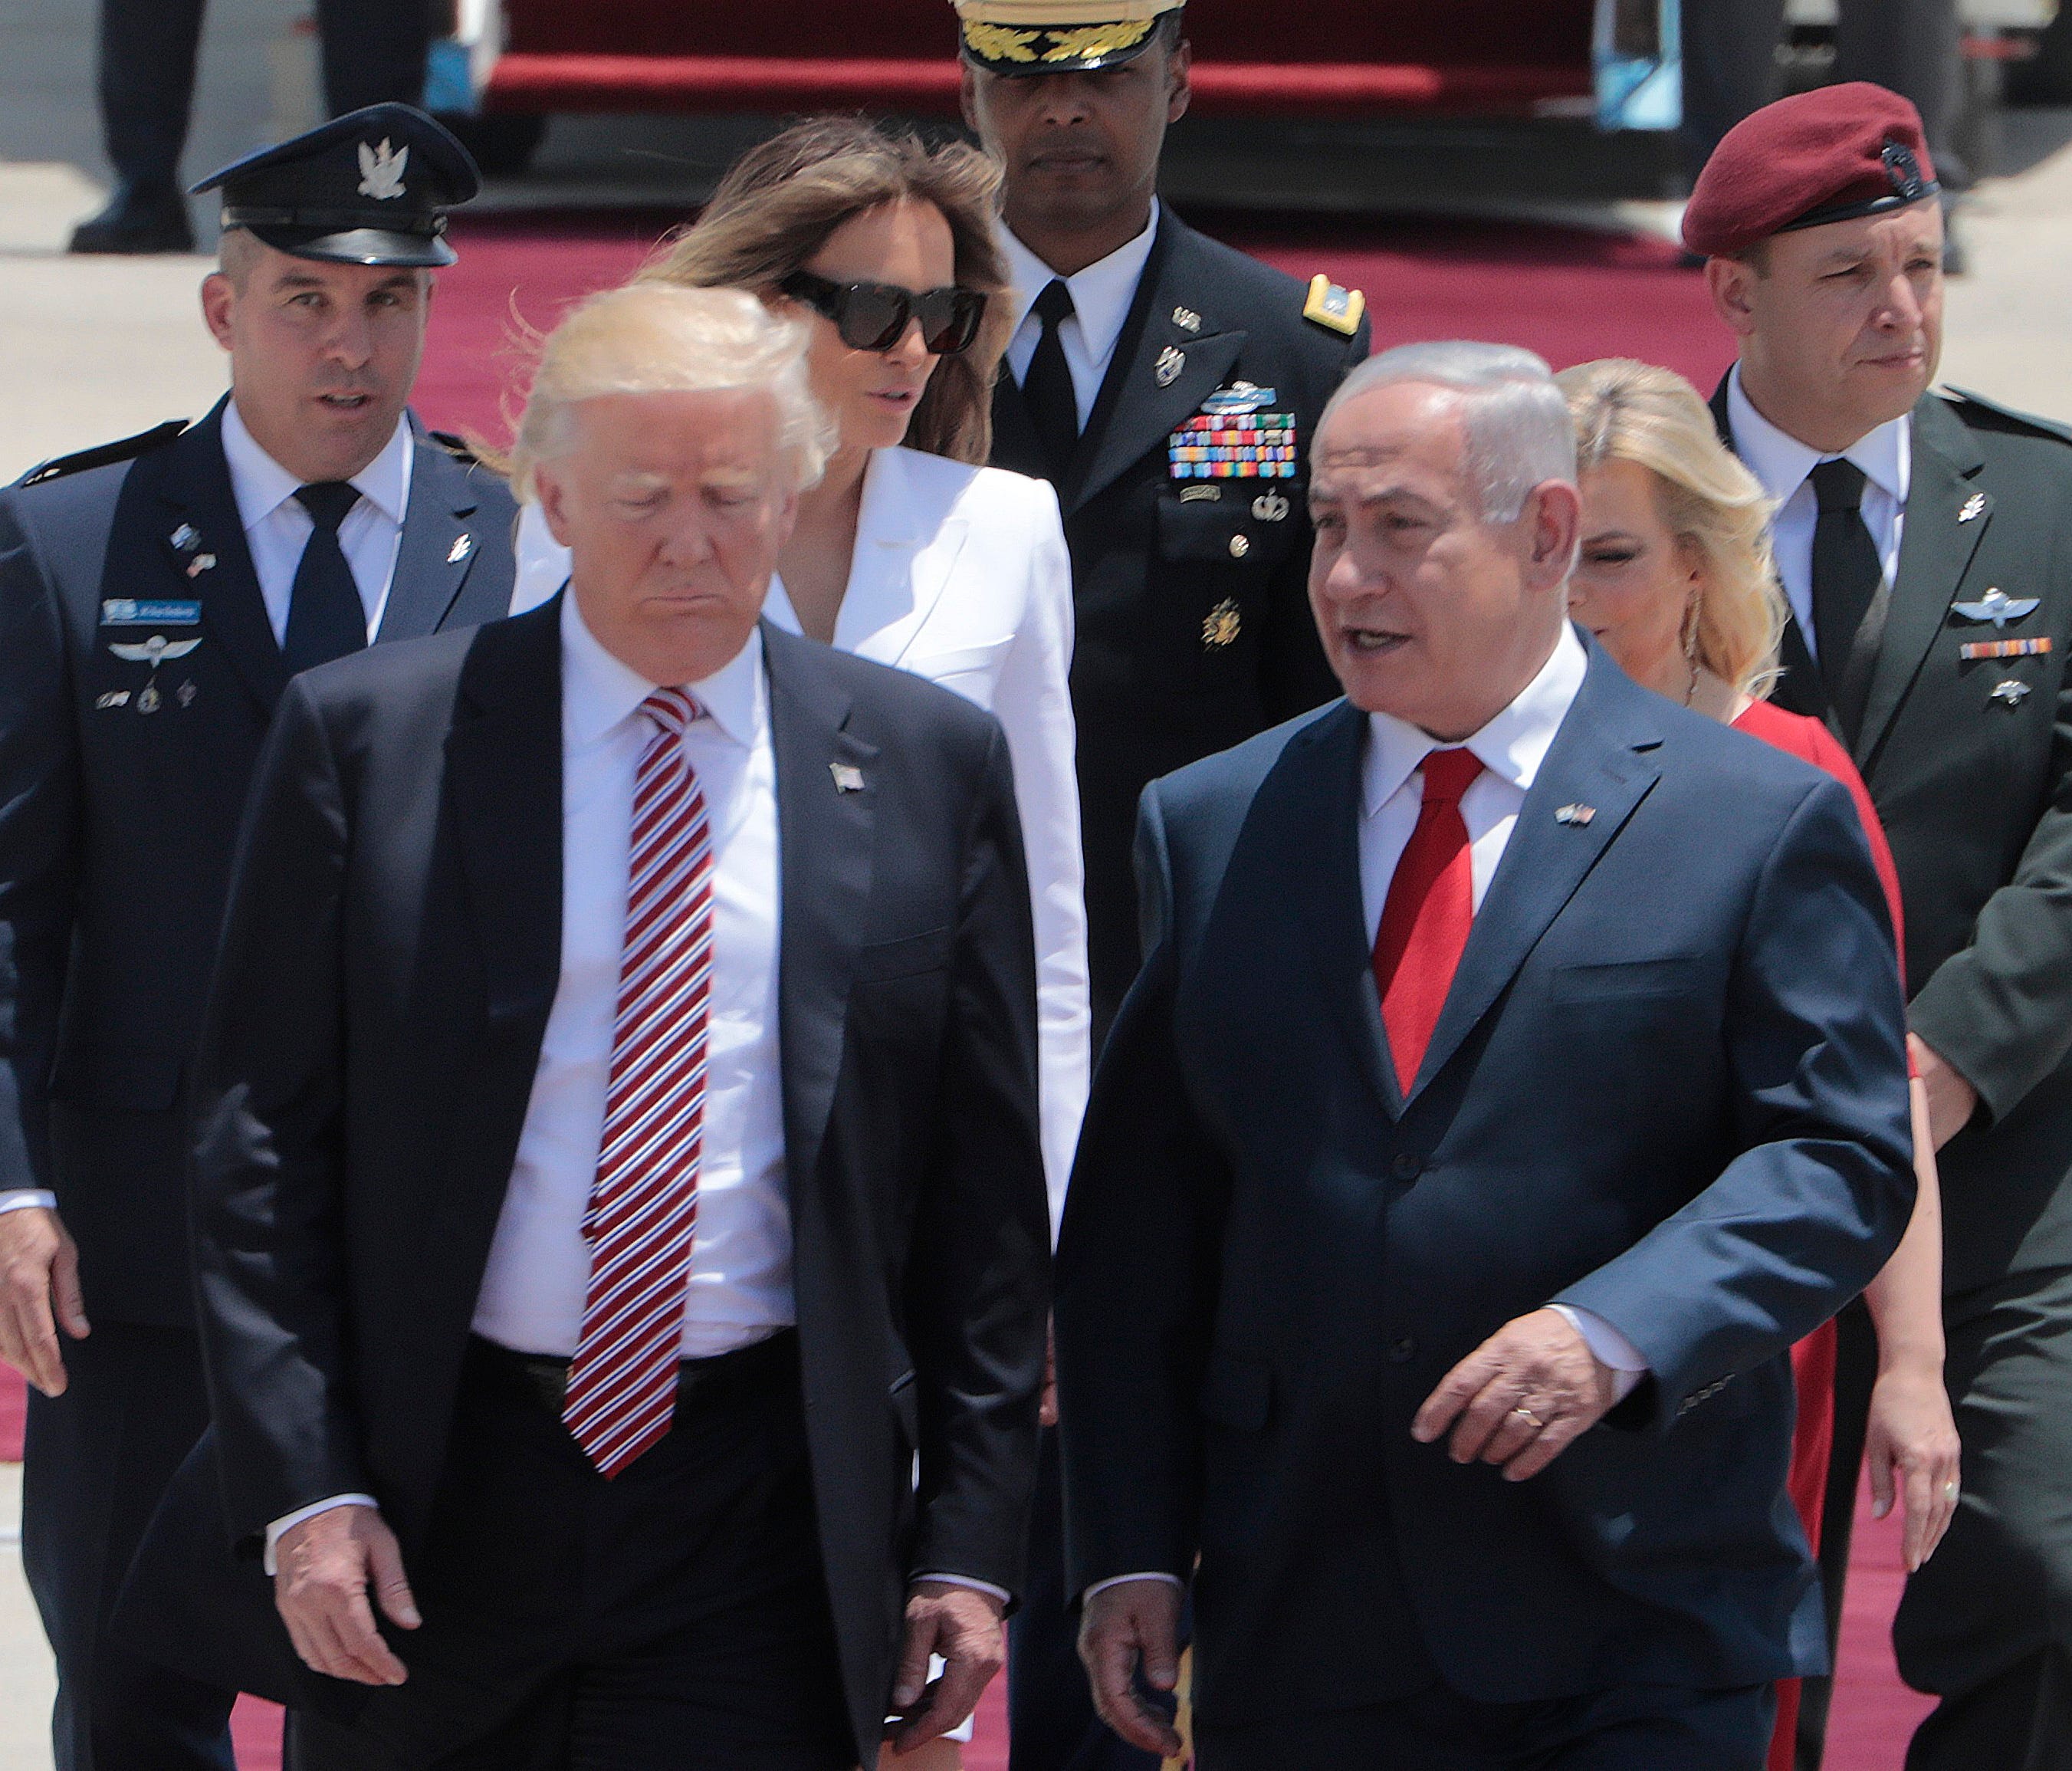 President Trump and his wife, first lady Melania Trump, are welcomed by Israeli Prime Minister Benjamin Netanyahu upon arrival at Ben Gurion Airport outside Tel Aviv, Israel Monday.